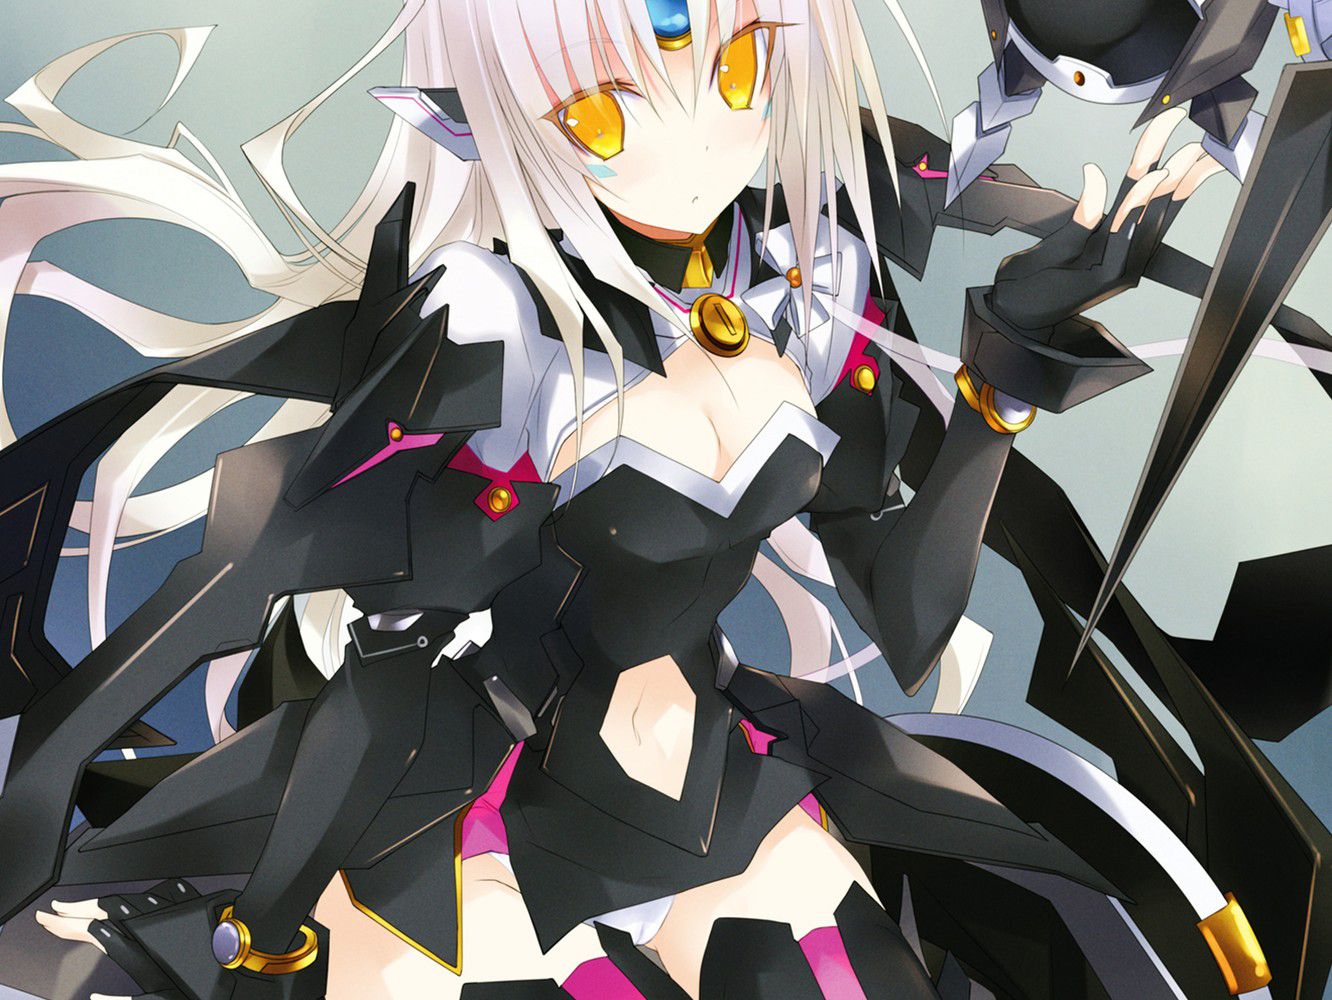 [Elsword] erotic pictures of Eve part 2 2